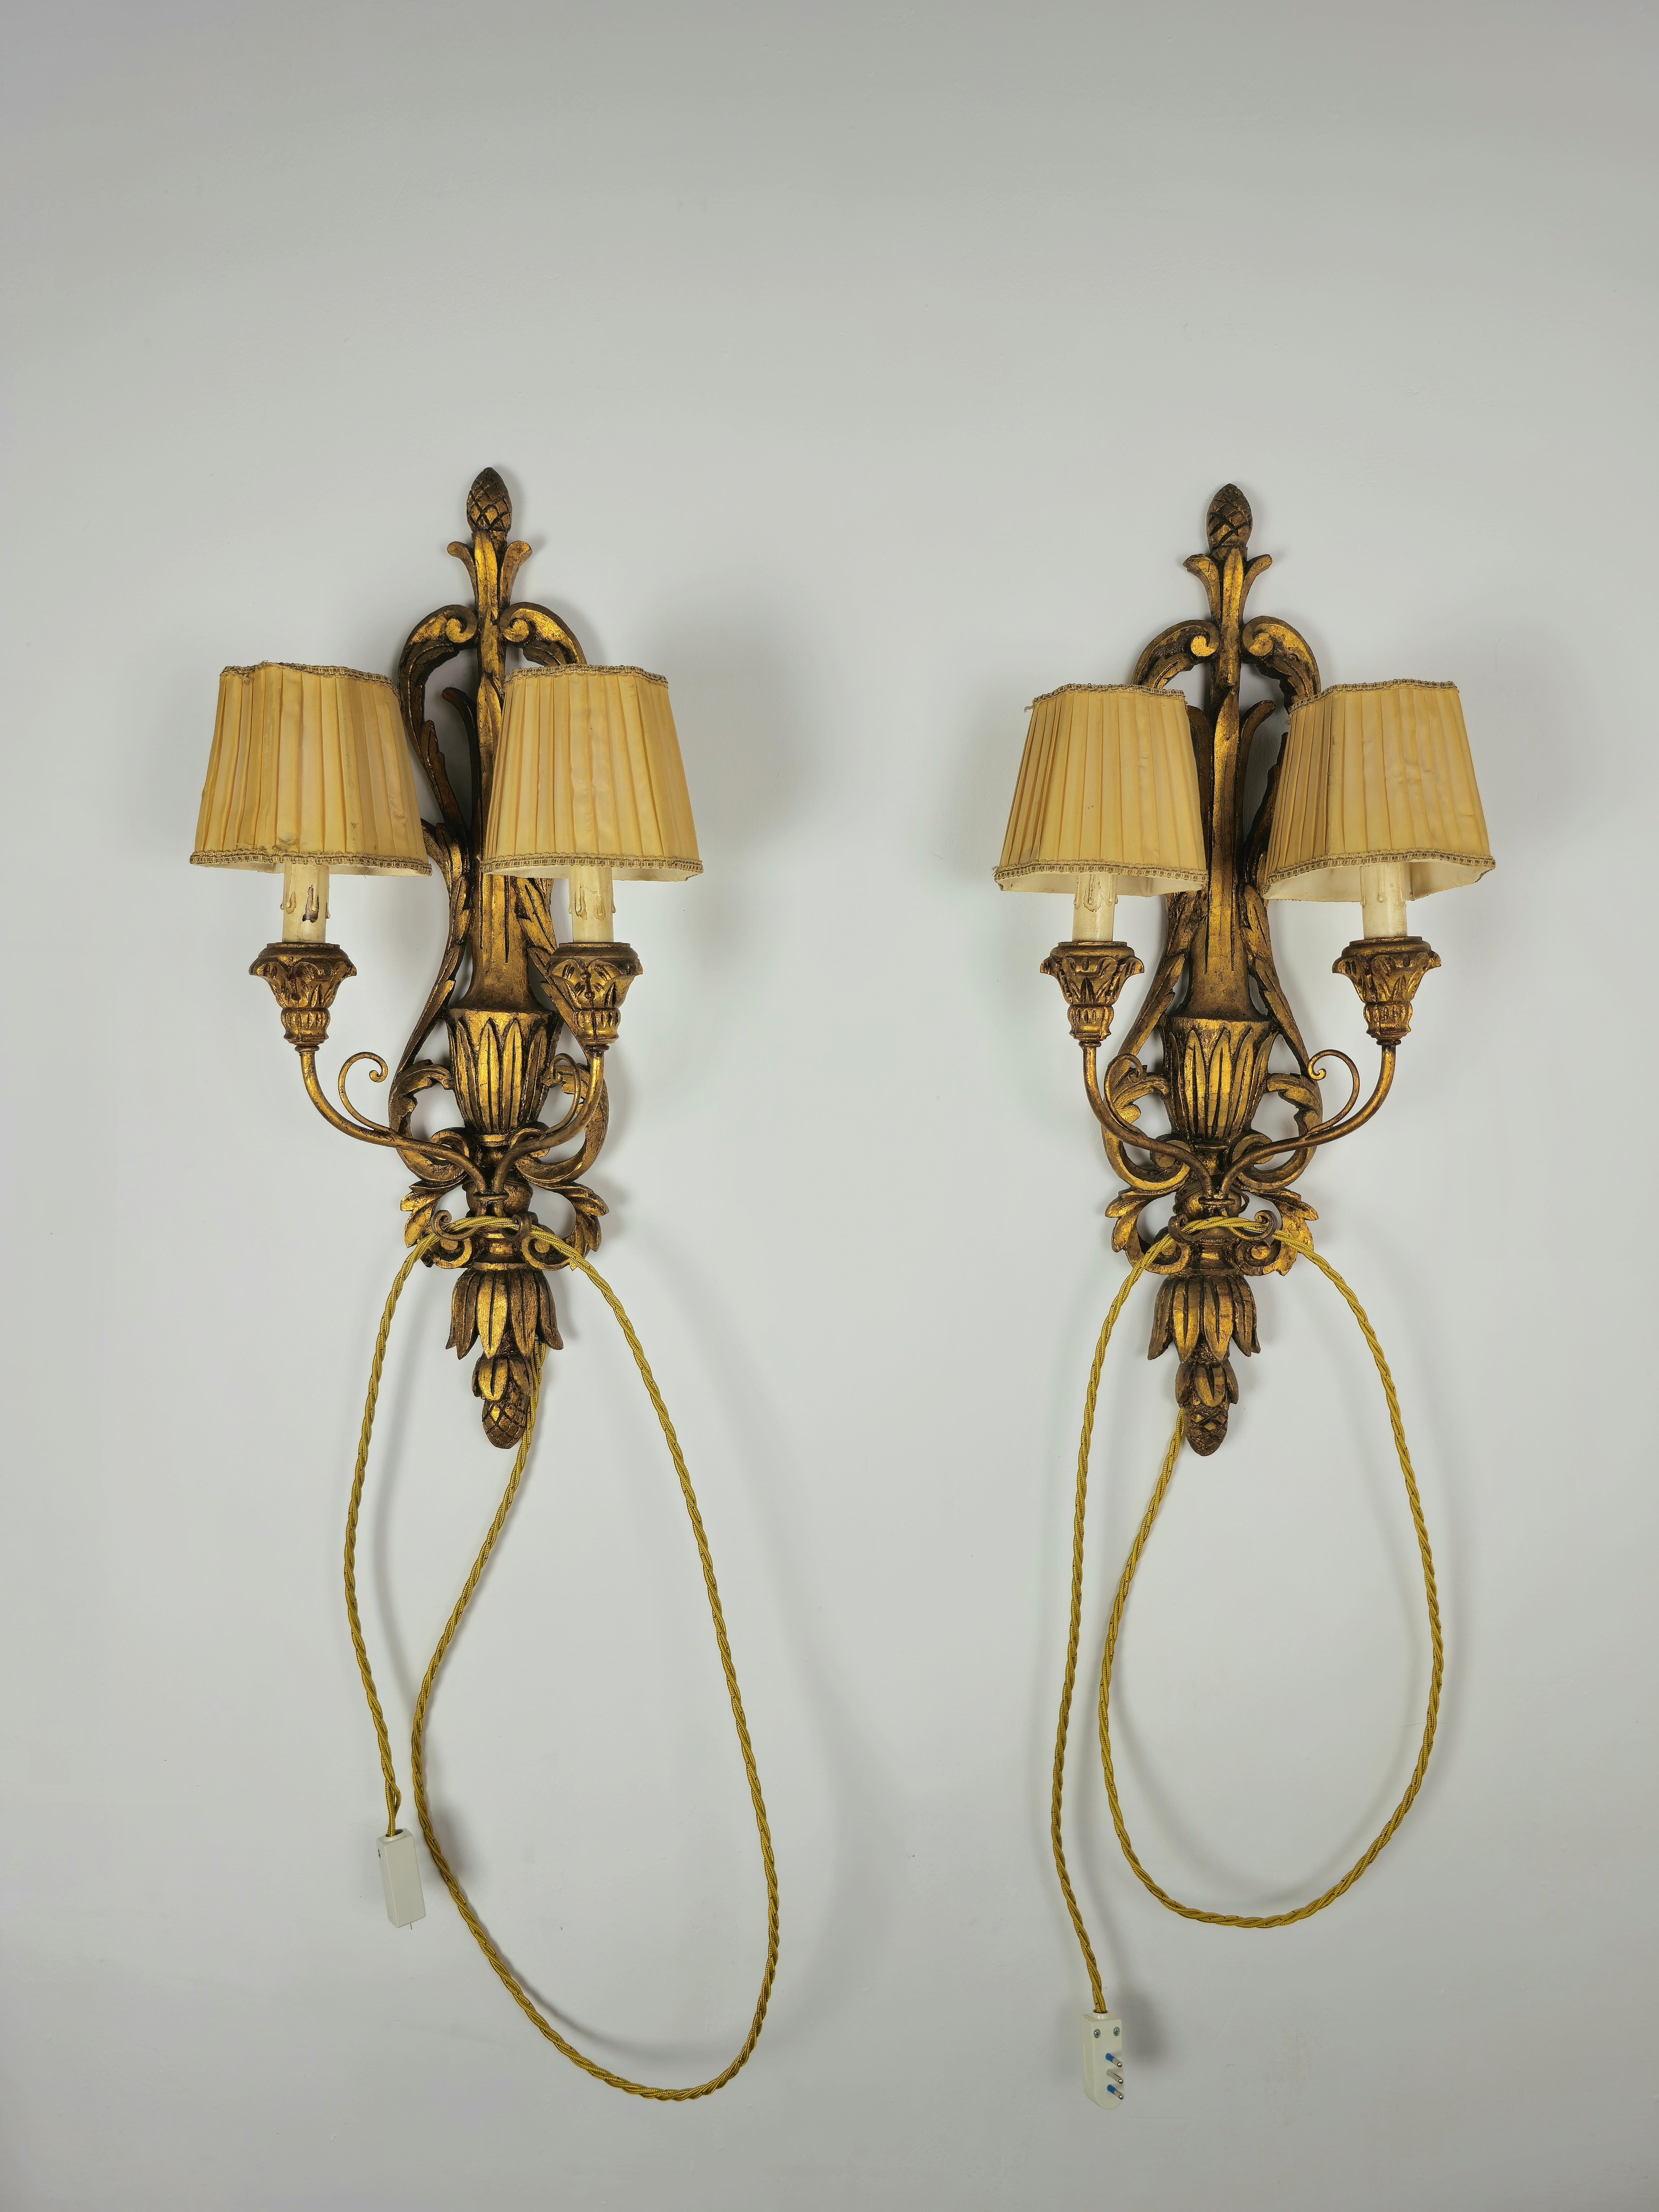 Pair of Wall Lights Sconces Wood Carved Silk Midcentury Italian Design 1950s  8